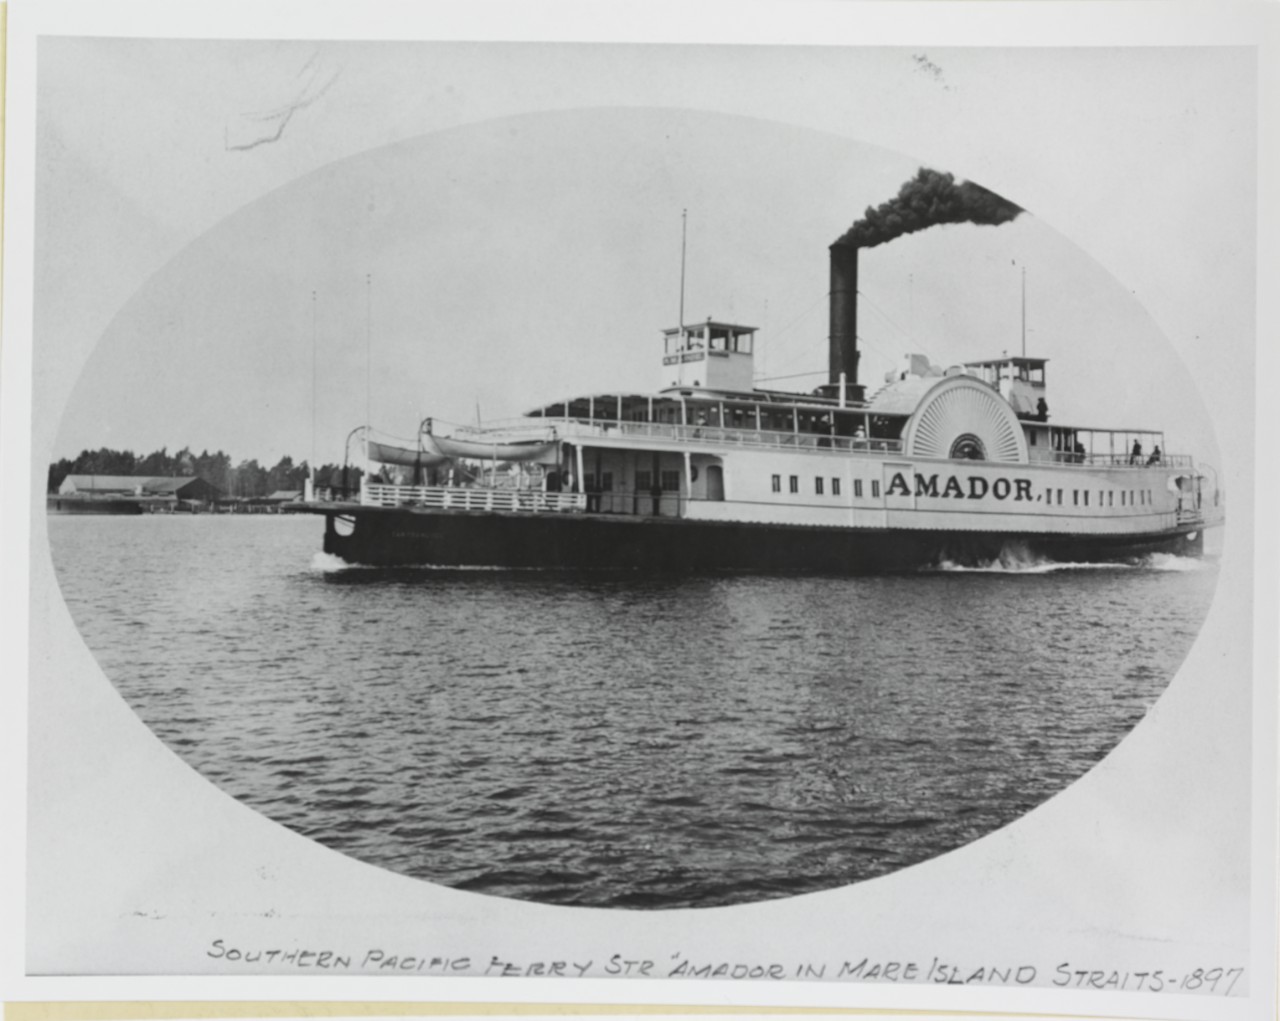 Southern Pacific Ferry AMADOR